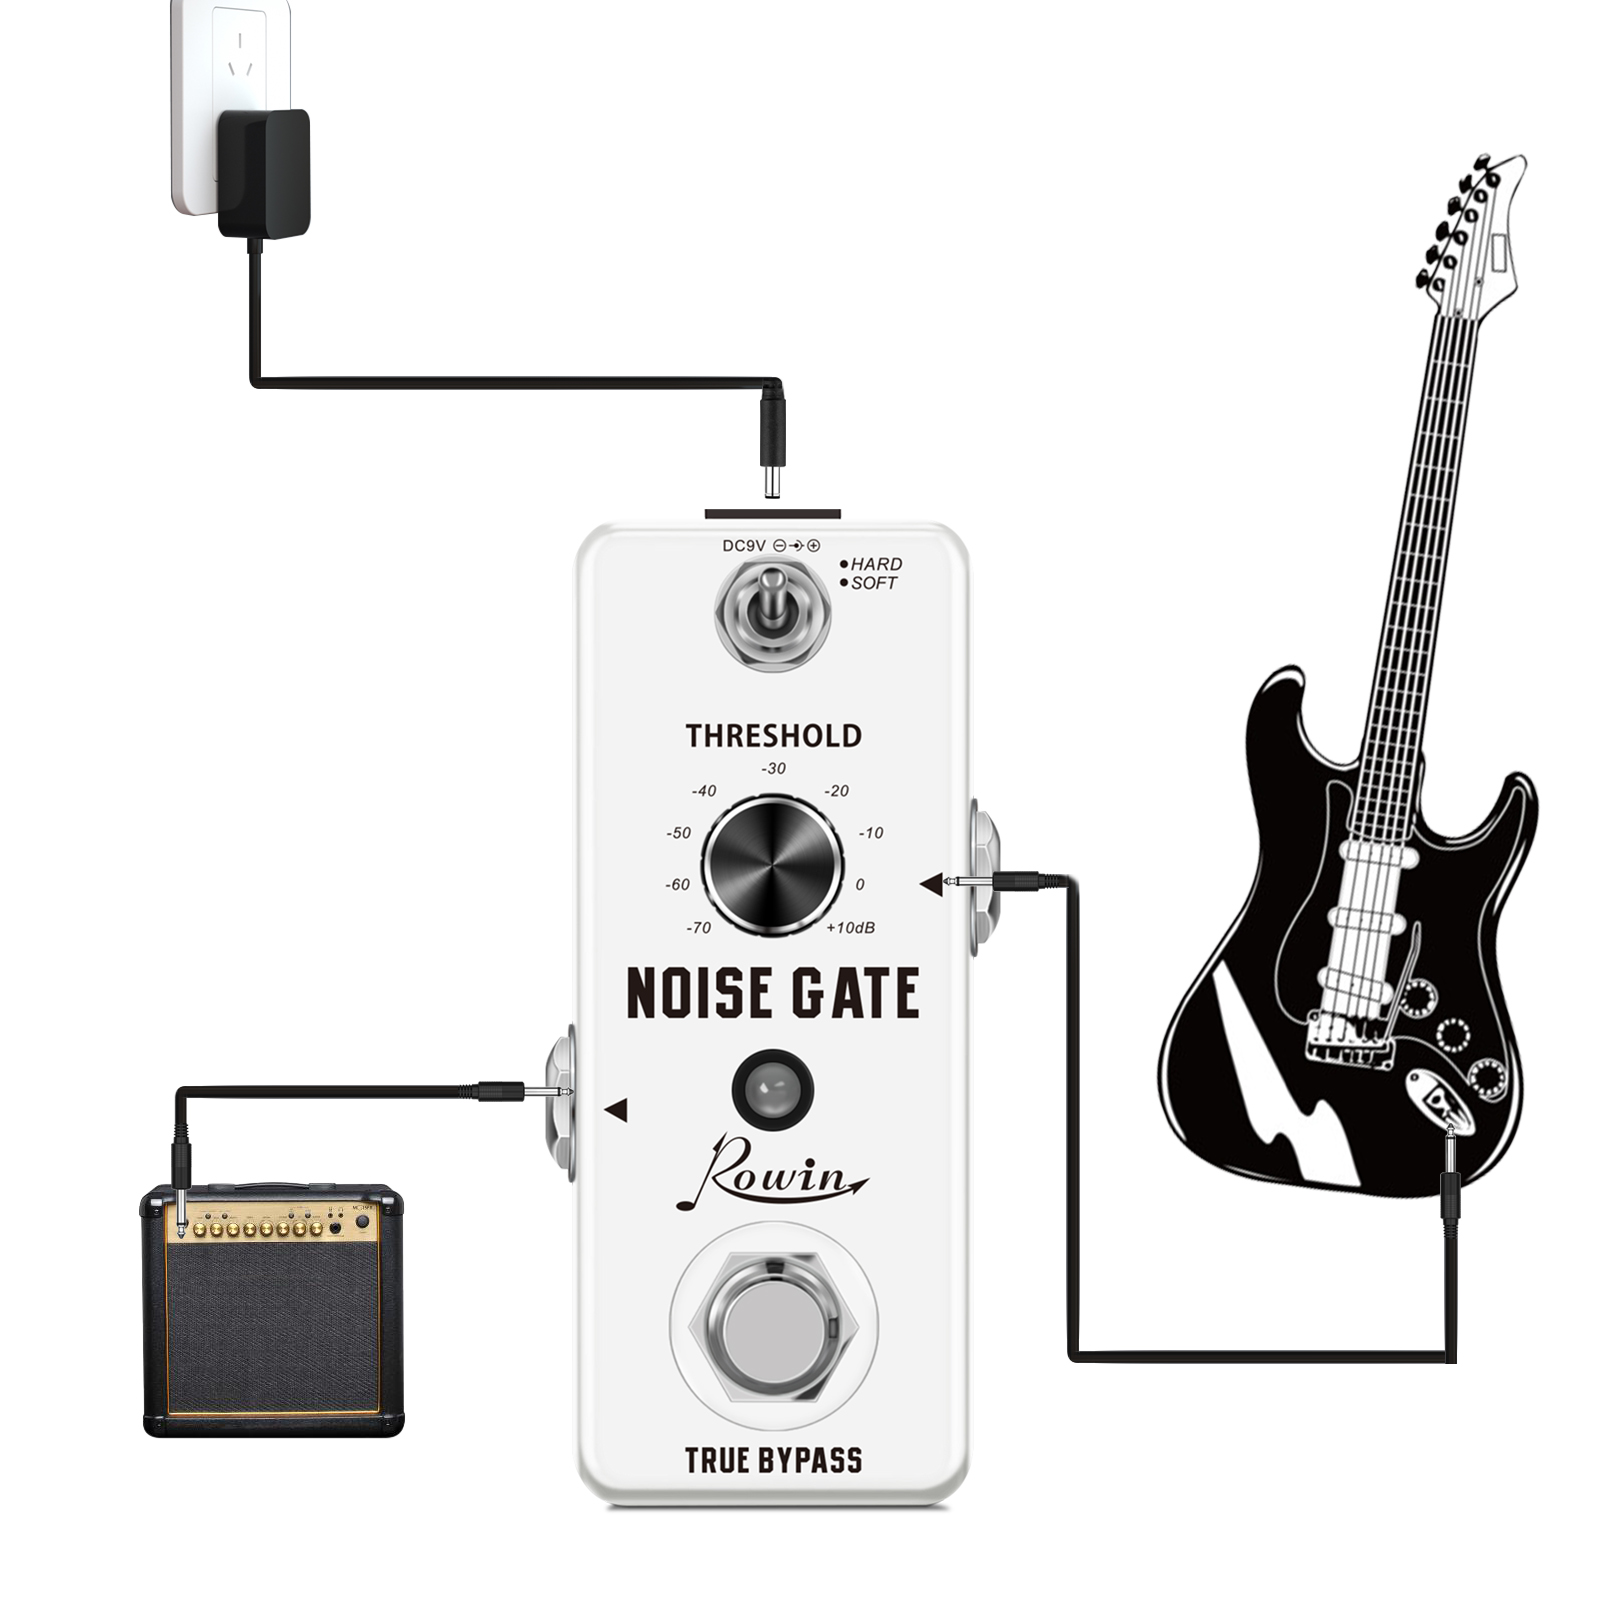 Rowin　Killer　Noise　Noise　Elecetric　with　Gate　Suppressor　Pedal,　Guitar　for　Effect　Models　LEF-319　Guitar　Bass